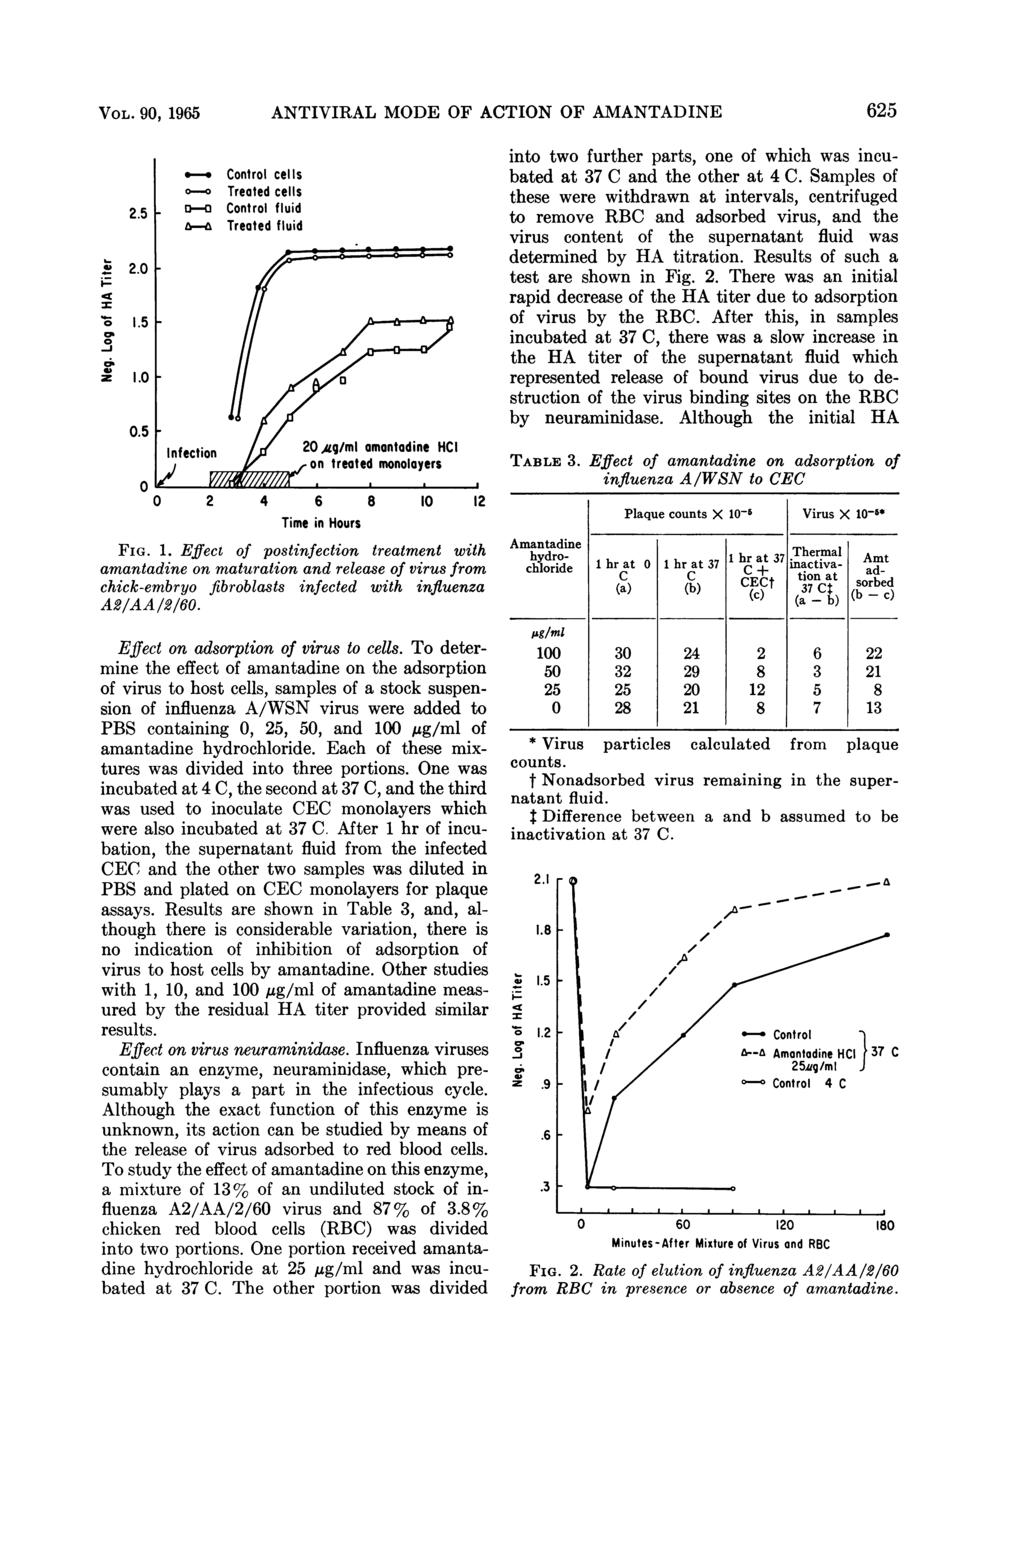 VOL. 90, 1965 4 2.0 C.5 1.0 1 0.5- ANTIVIRAL MODE OF ACTION OF AMANTADINE Infection /PZ 20, g/mi amantadine HCI V 00 0 V.,on treoted monolay.ers-- 0 2 4 6 8 10 12 Time in Hours FIG. 1. Effect of postinfection treatment with amantadine on maturation and release of virus from chick-embryo fibroblasts infected with influenza A2/AA/2/60.